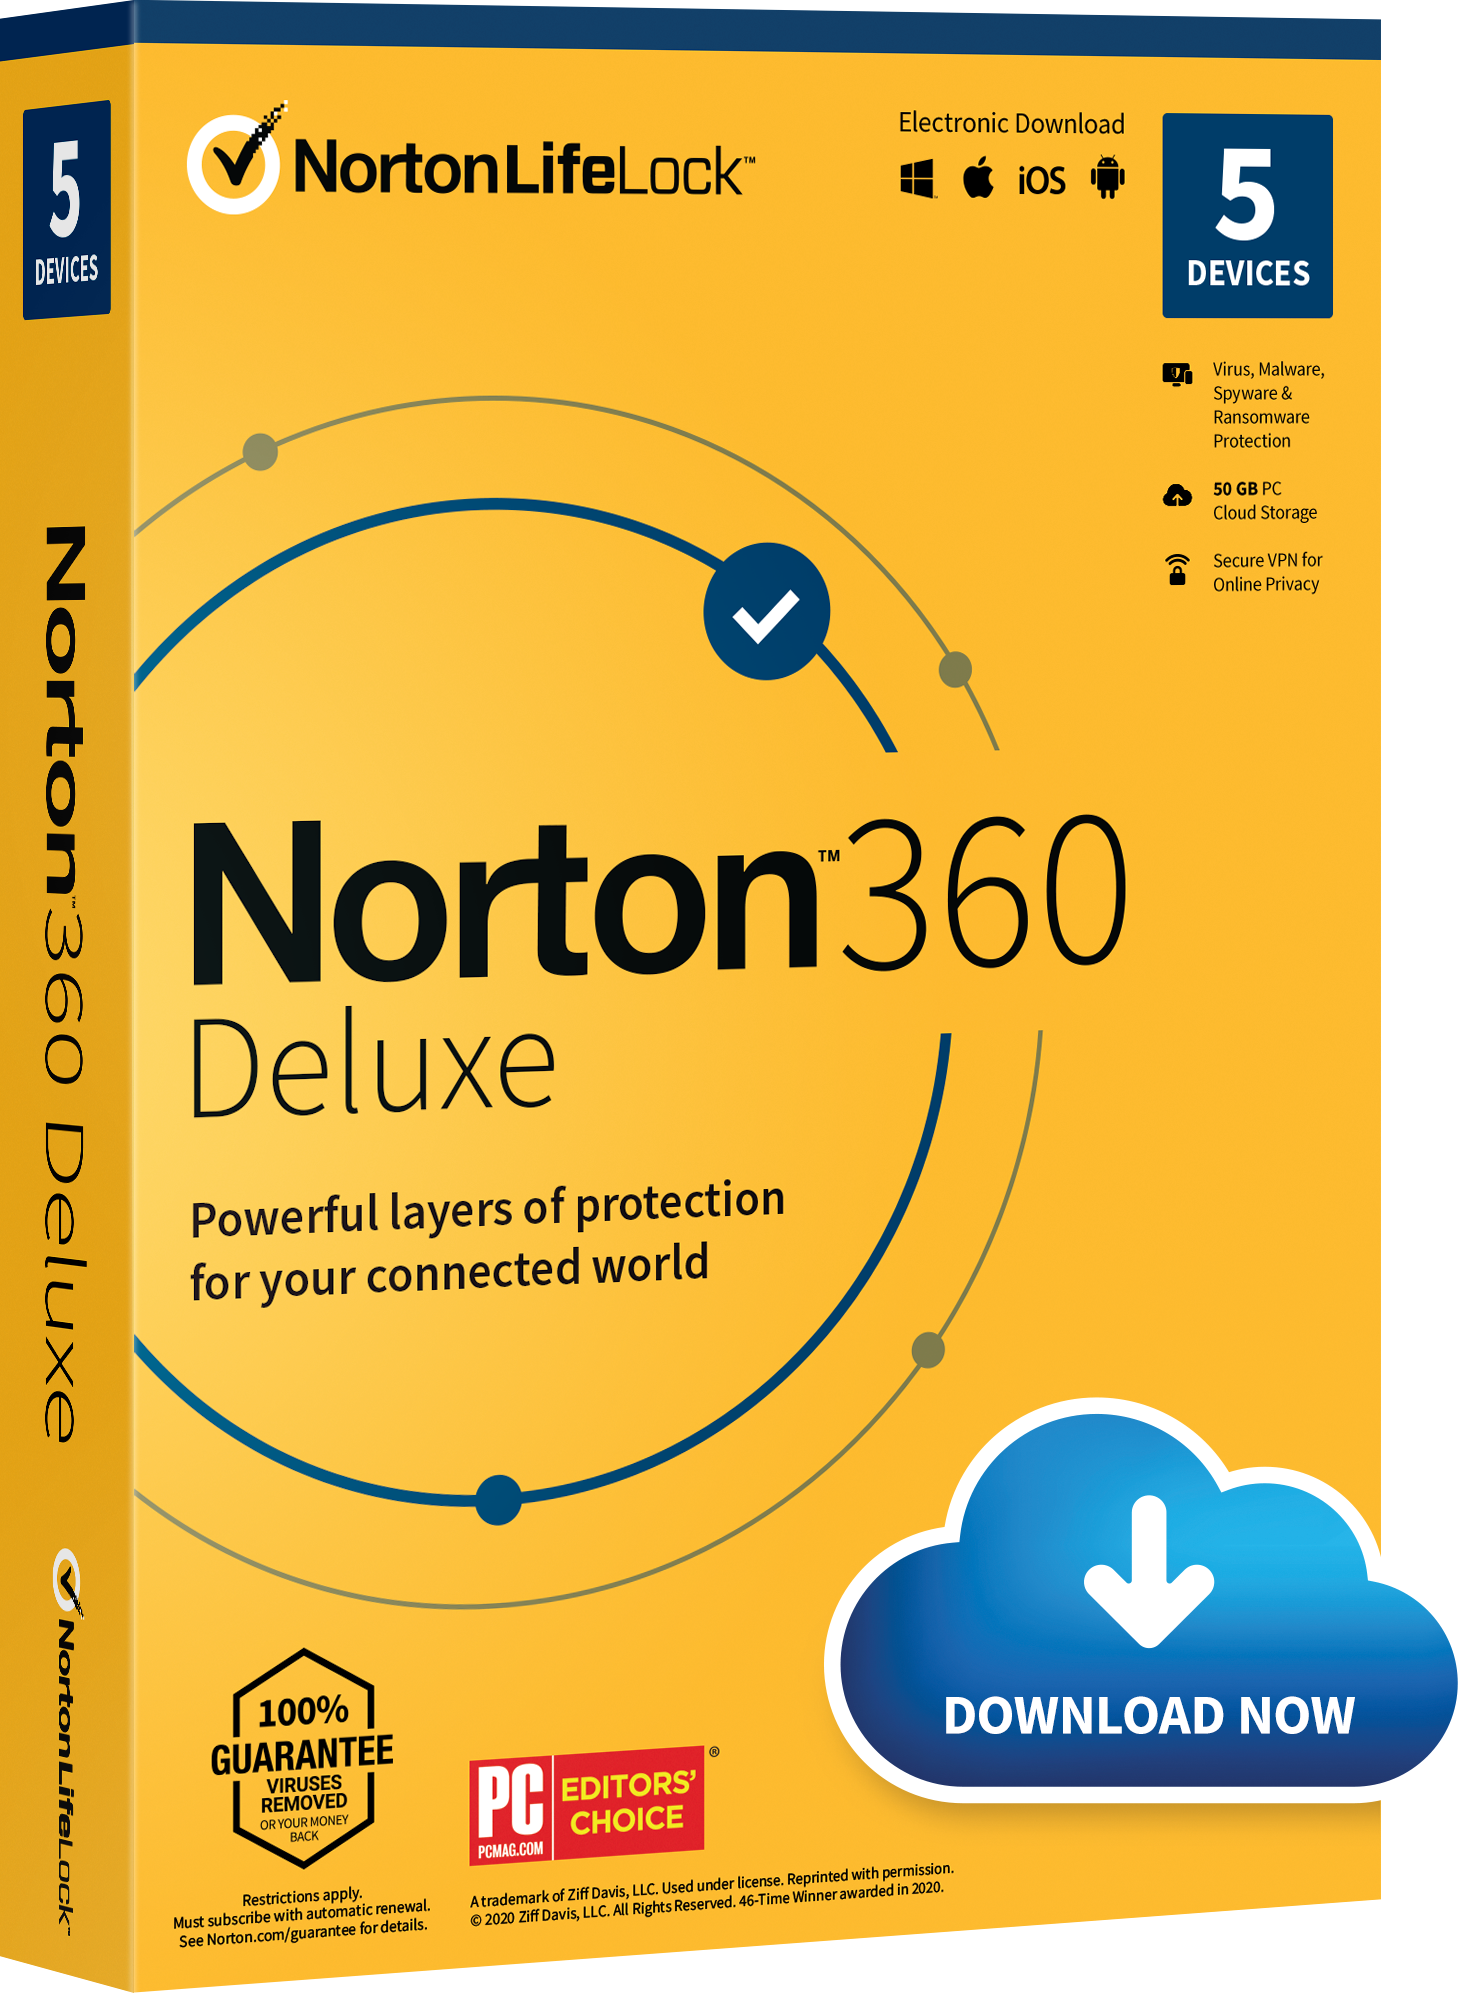 how to disable norton security mac